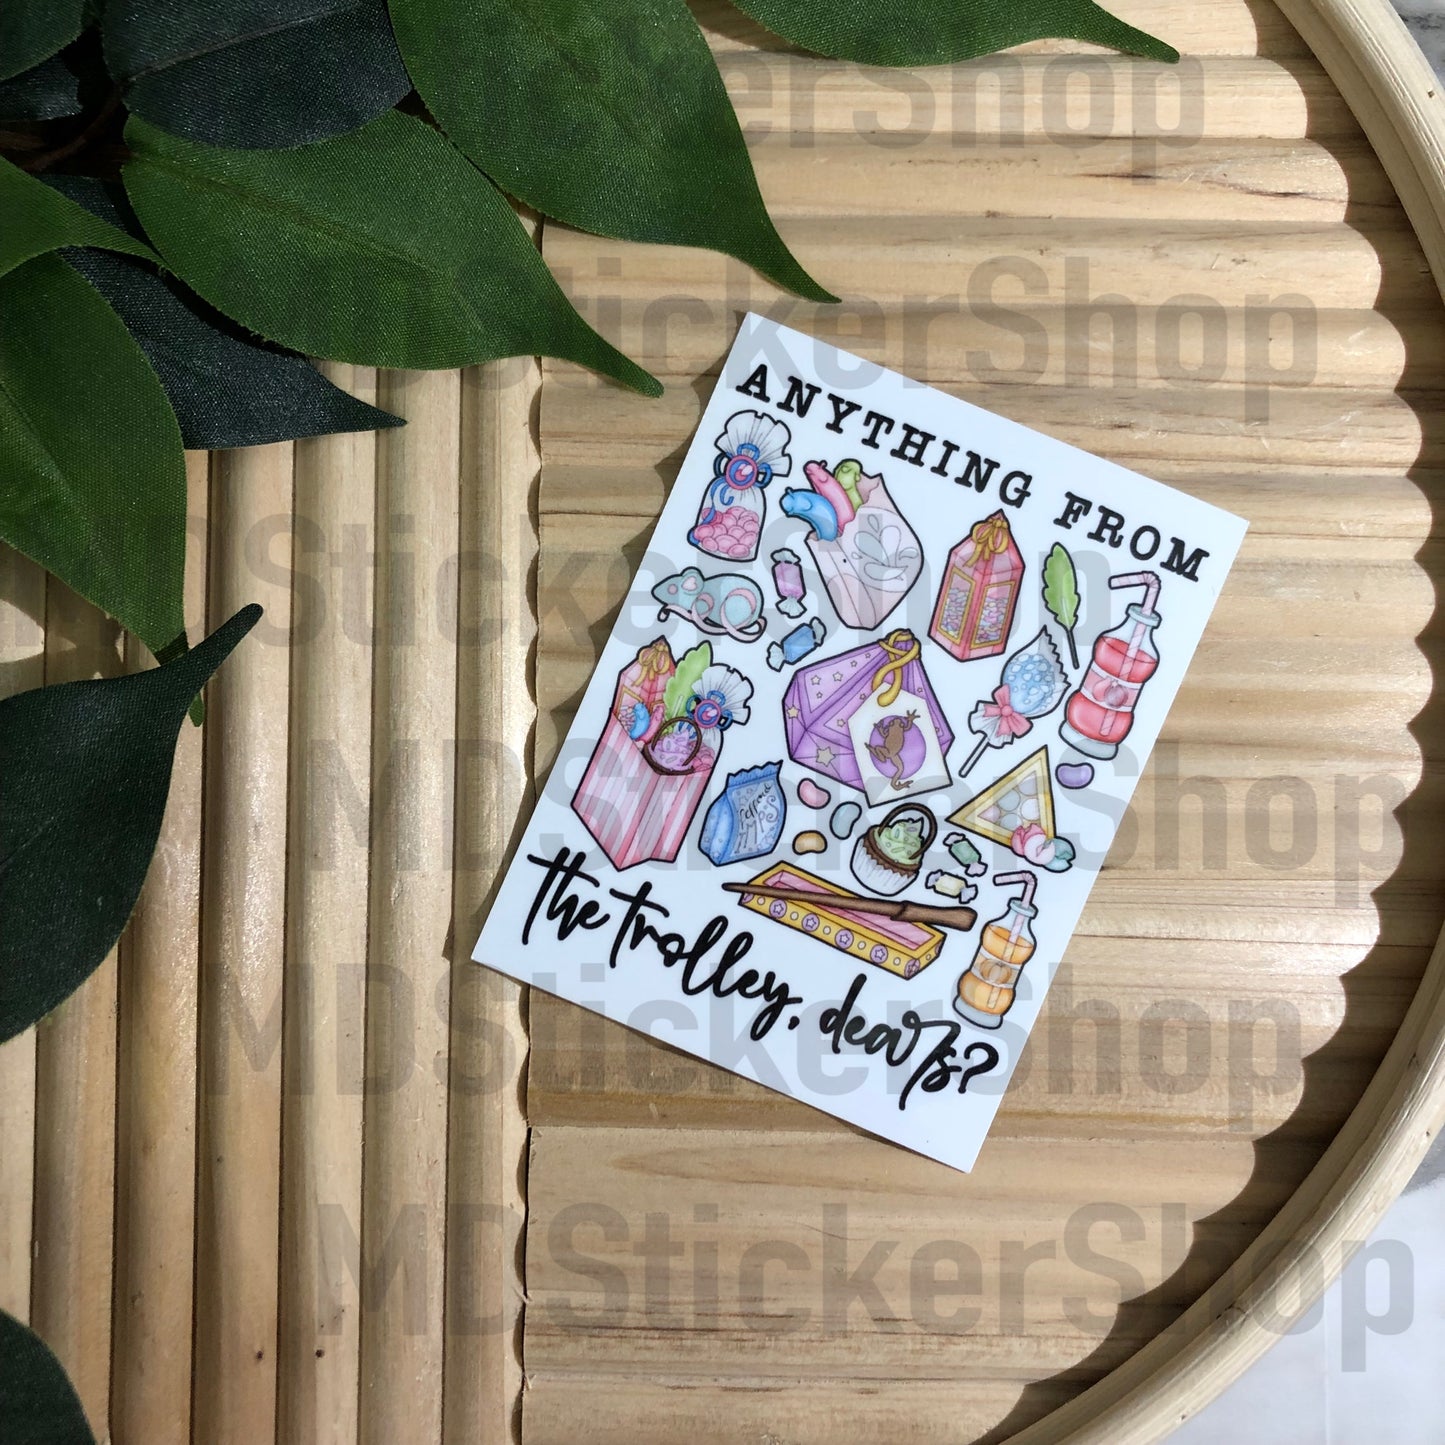 Anything From the Trolly Dear? Vinyl Sticker